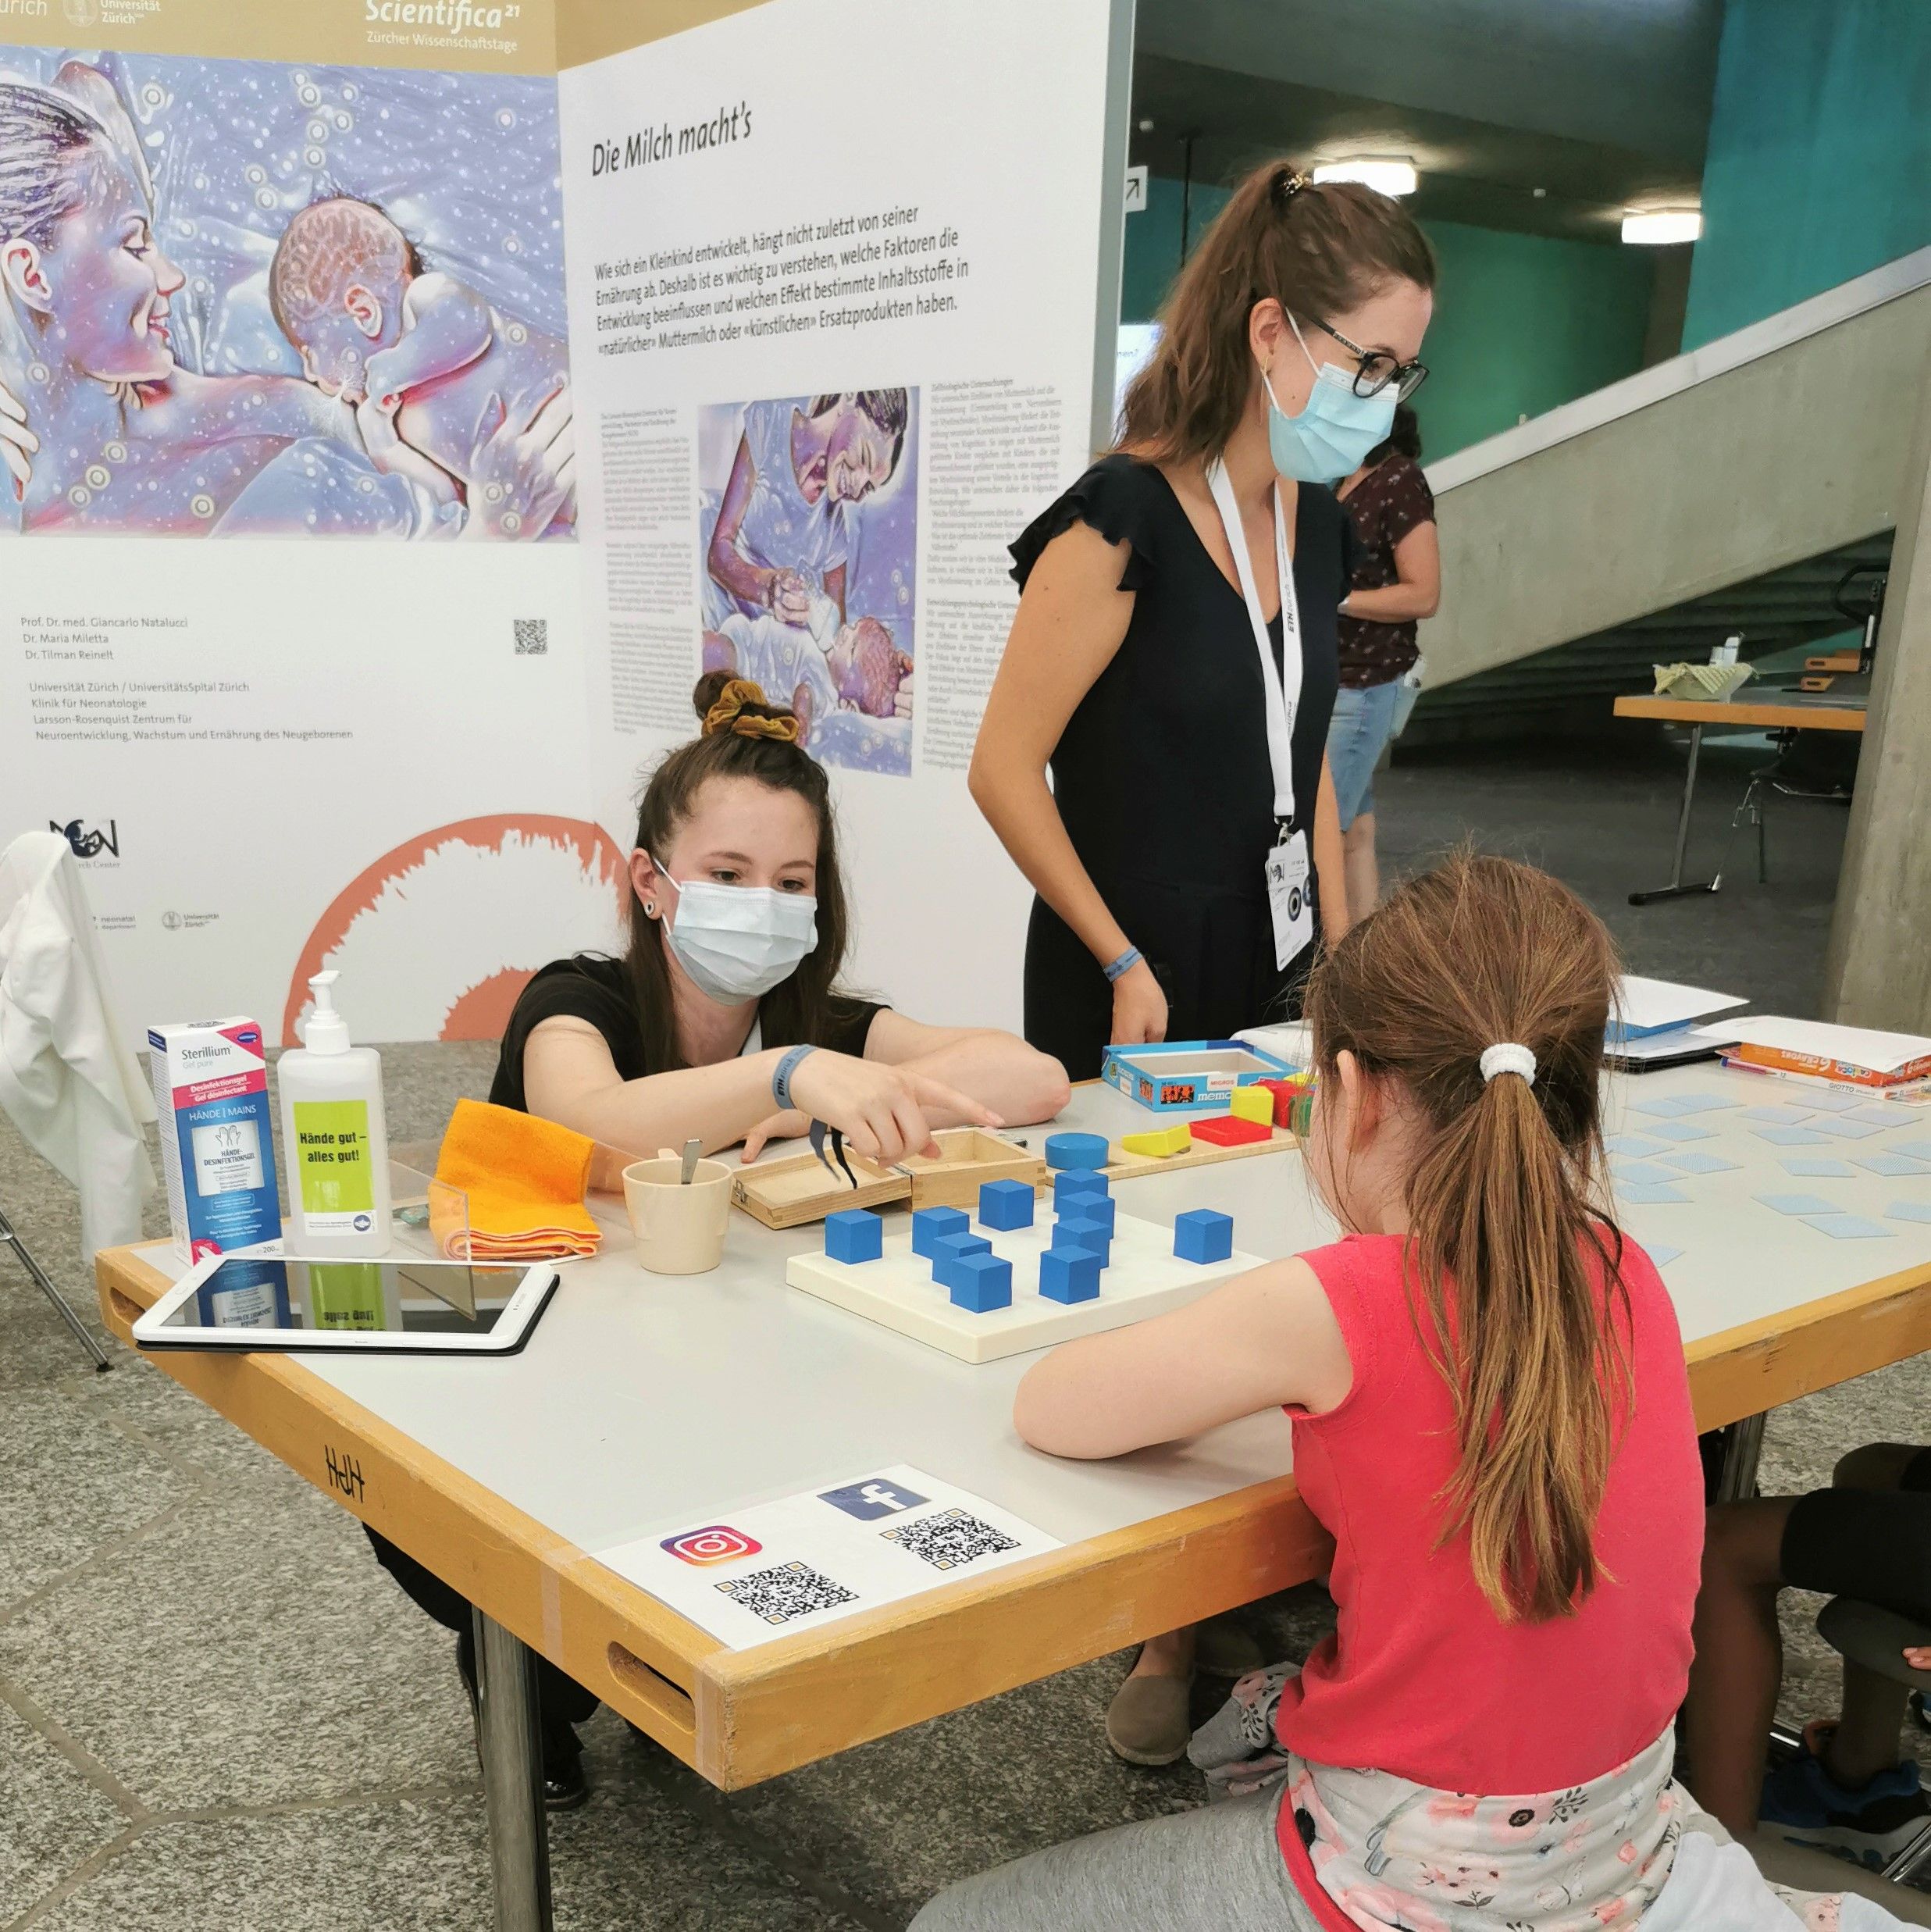 NGN Research Center Exhibition booth at Scientifica with interactive tests for children and adults